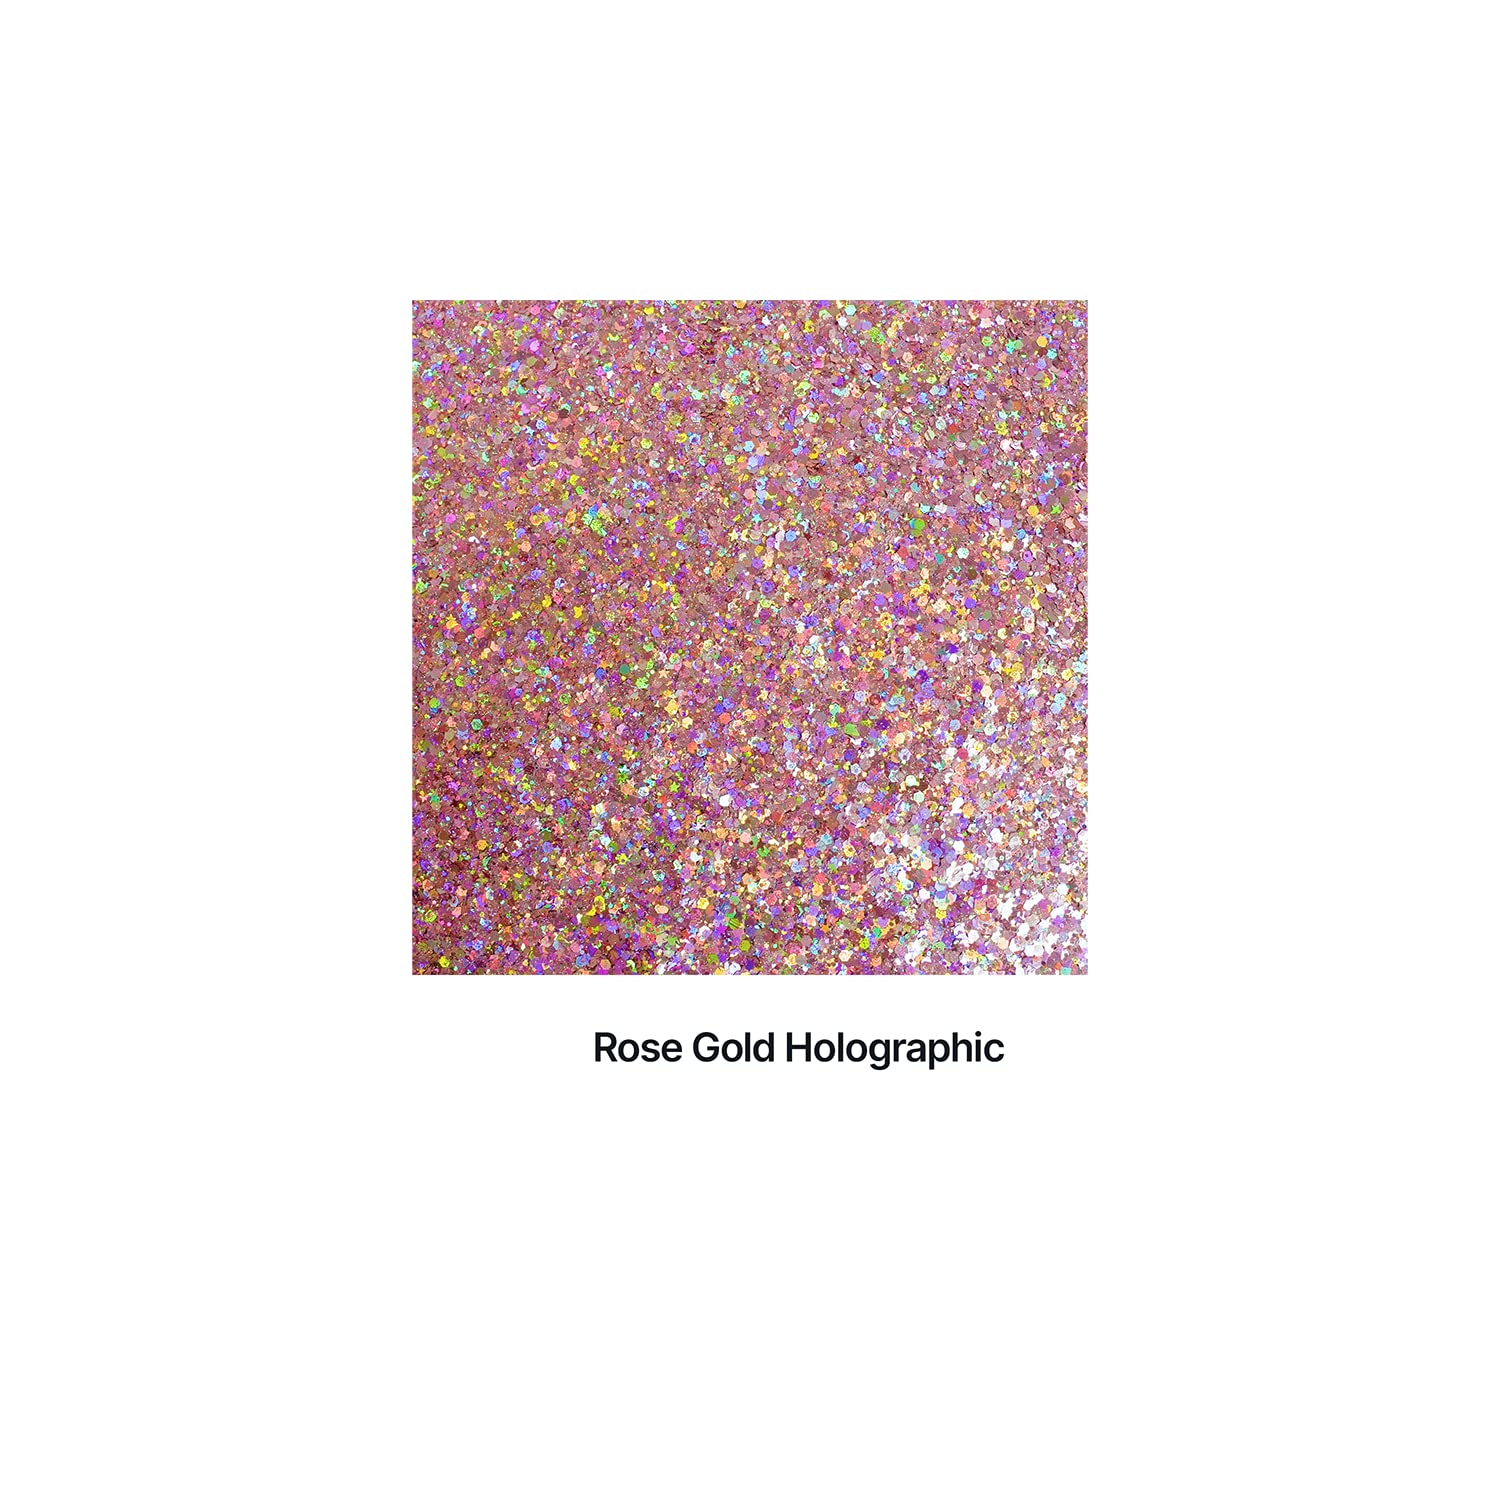 Hemway Rose Gold Holographic Mix Glitter Chunky Multi Purpose Dust Powder Arts & Crafts Decorations Costumes Makeup Cosmetic Face Eye Body Nails Skin Hair Festival 10g